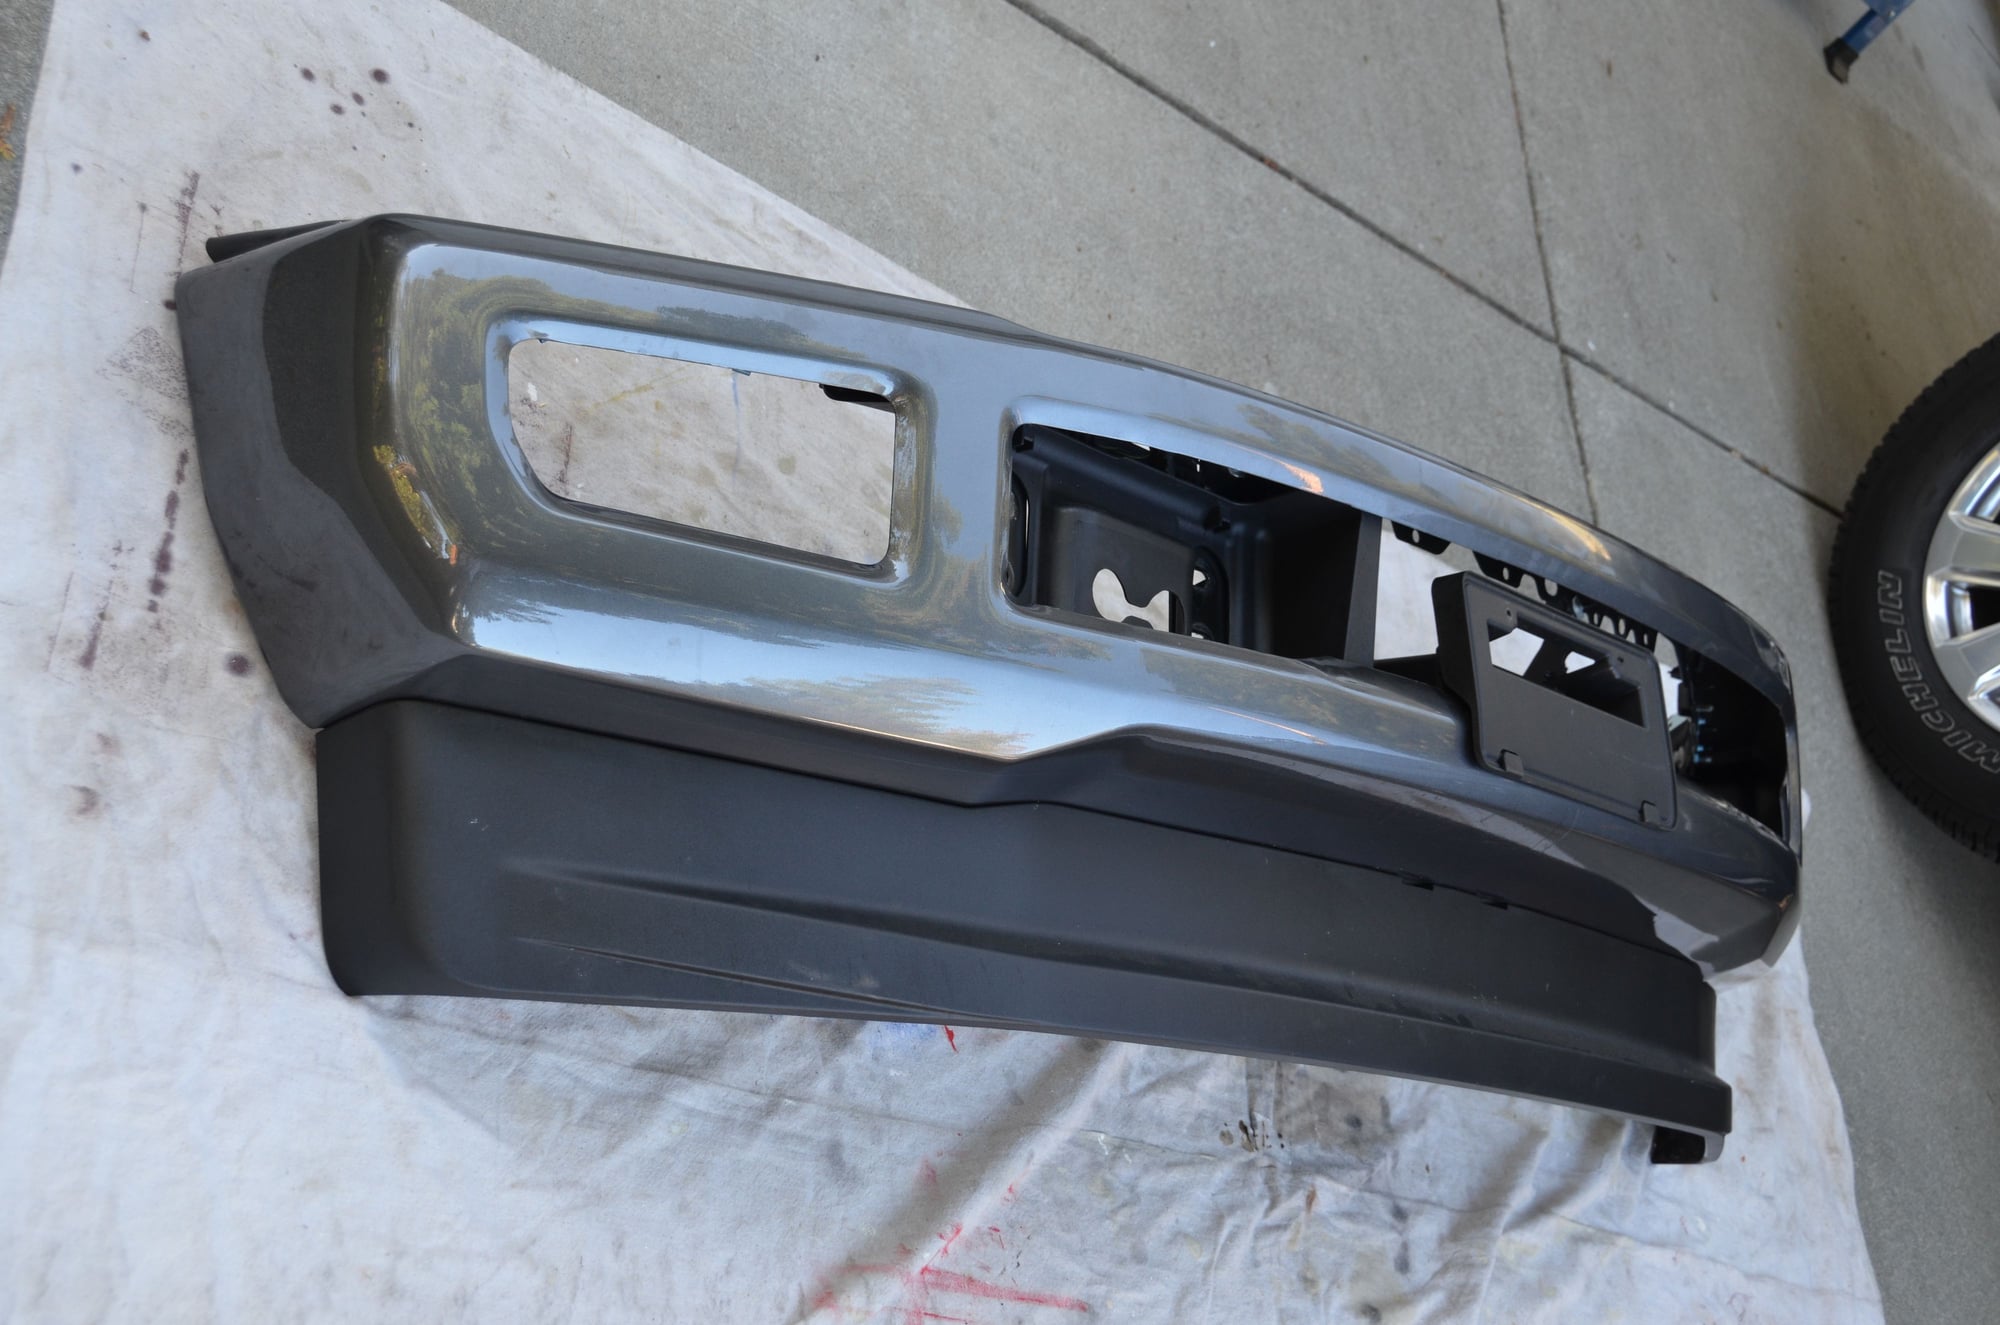 Exterior Body Parts - 2018- Ford F-250 Platinum Front Bumper - Magnetic - Used - 2018 Ford F-250 Super Duty - Redwood City, CA 94061, United States